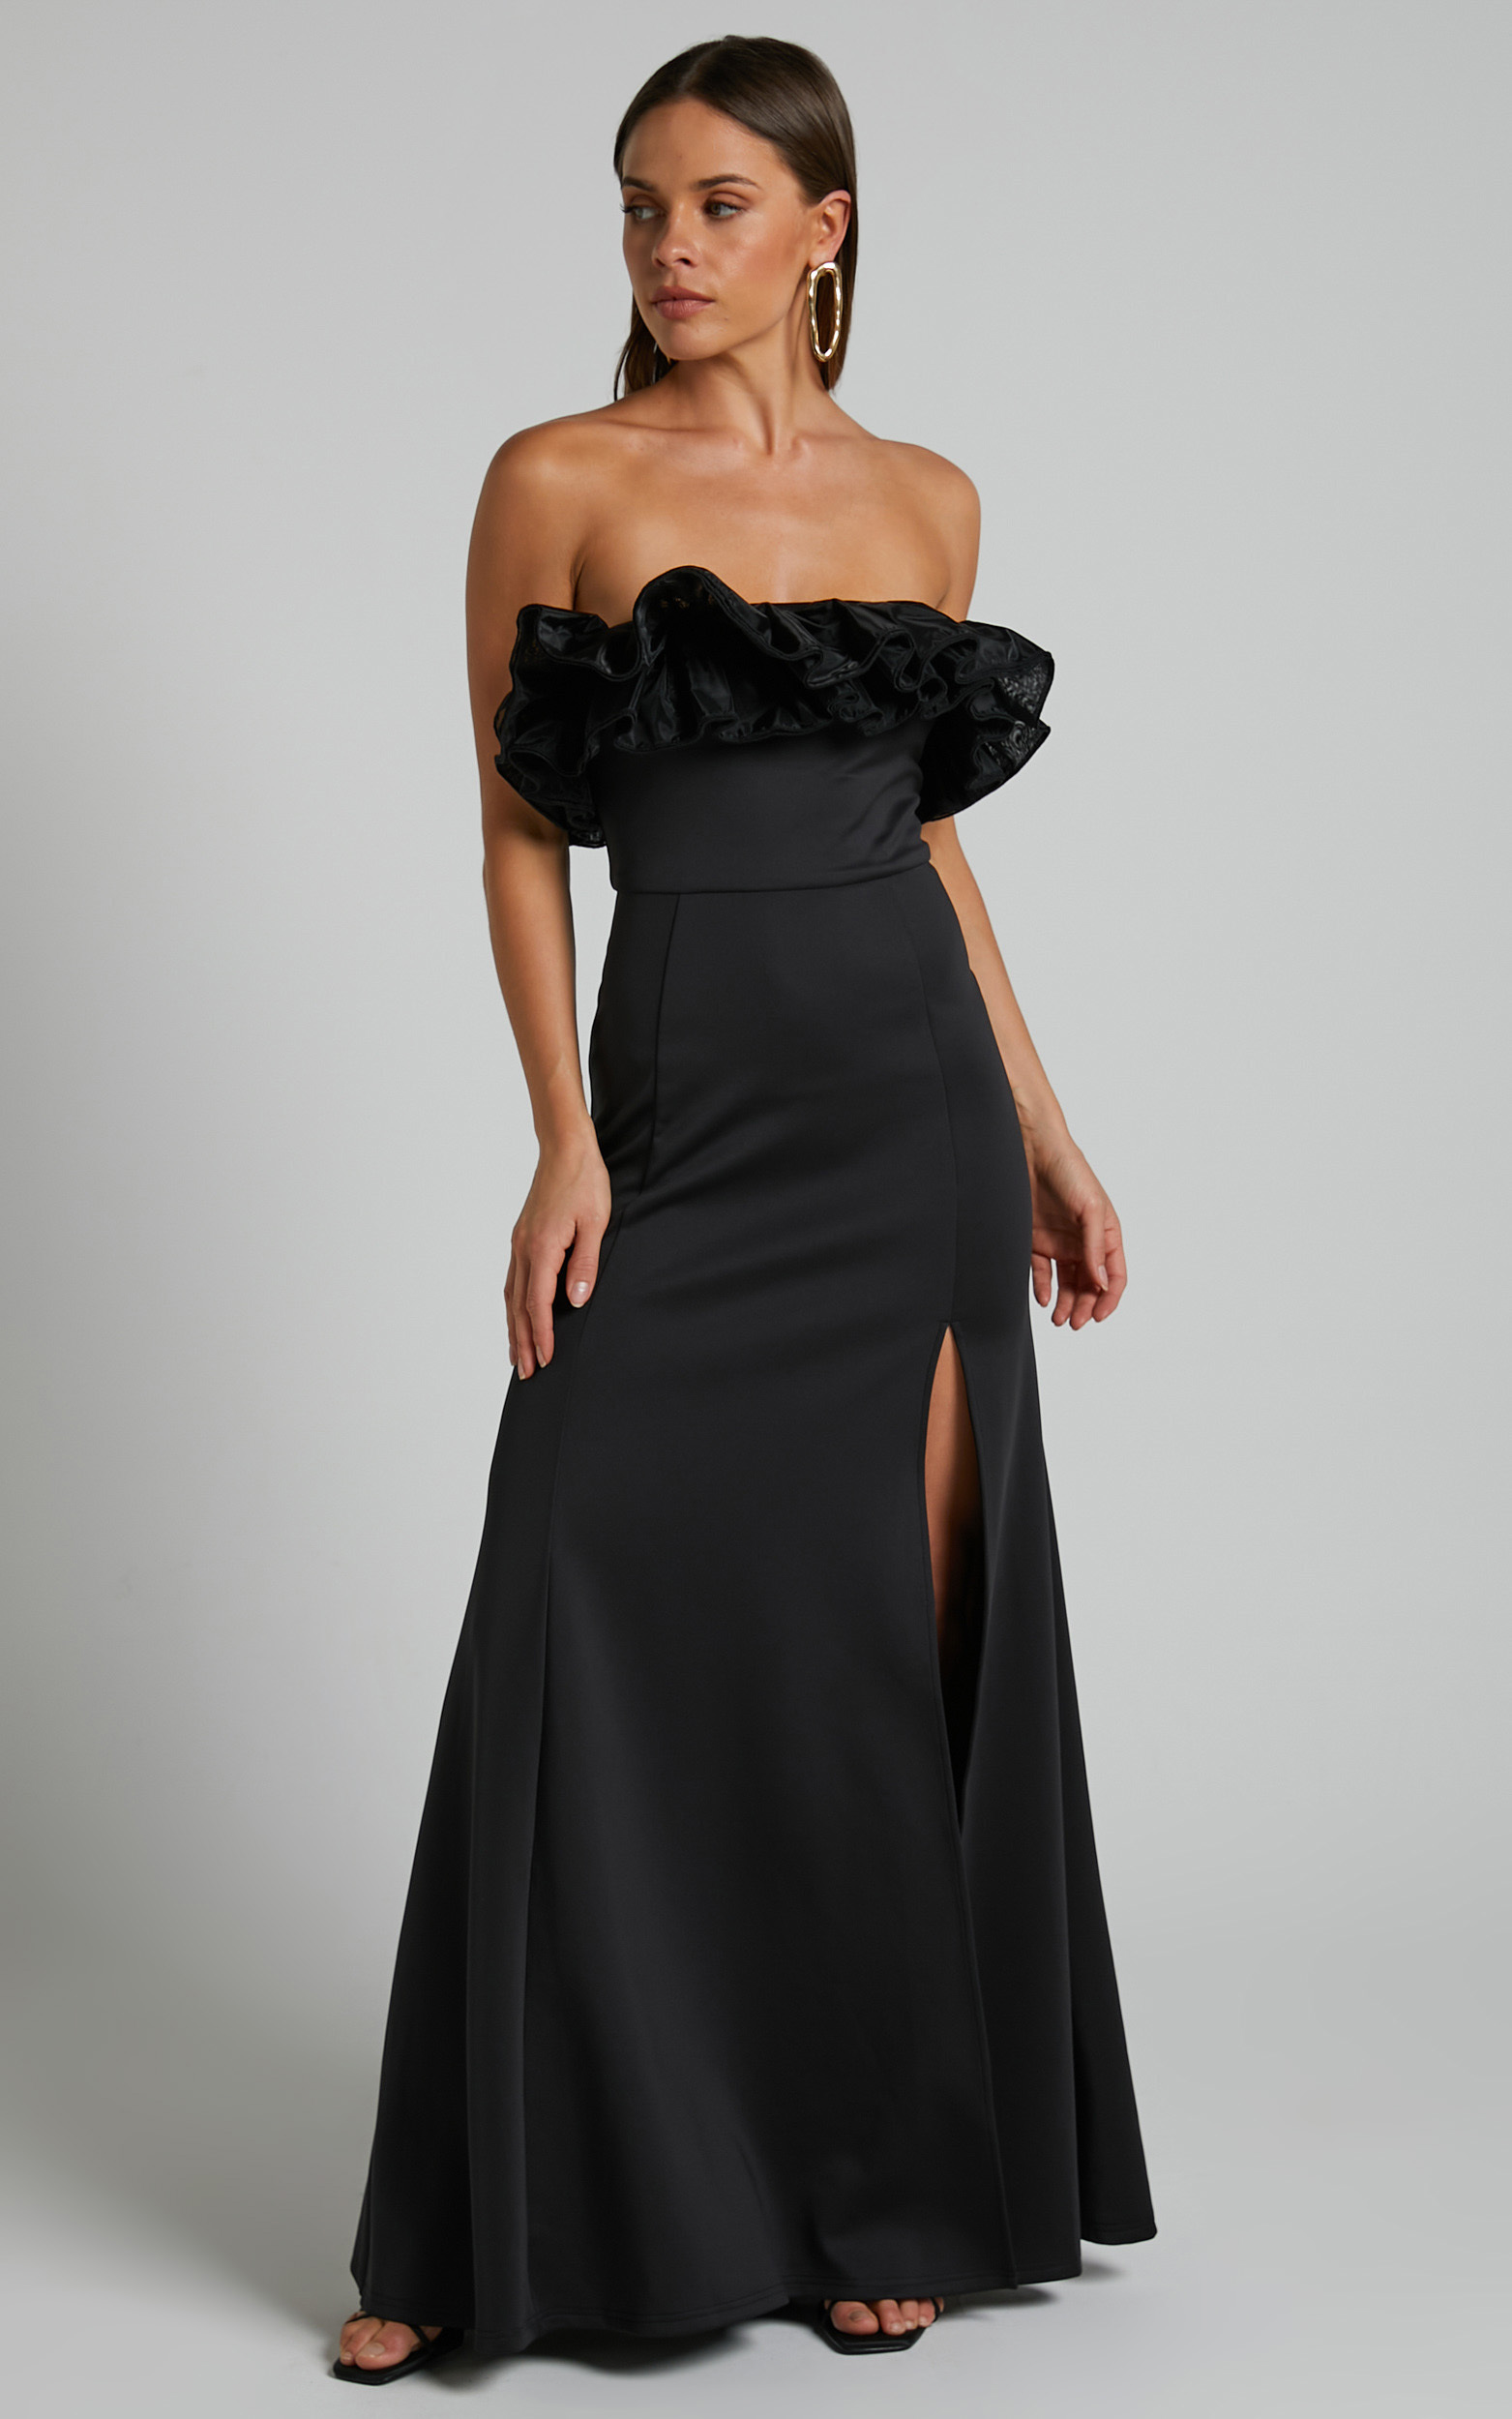 Cassius Off Shoulder Ruffle Ball Gown Dress in Black - 06, BLK1, hi-res image number null